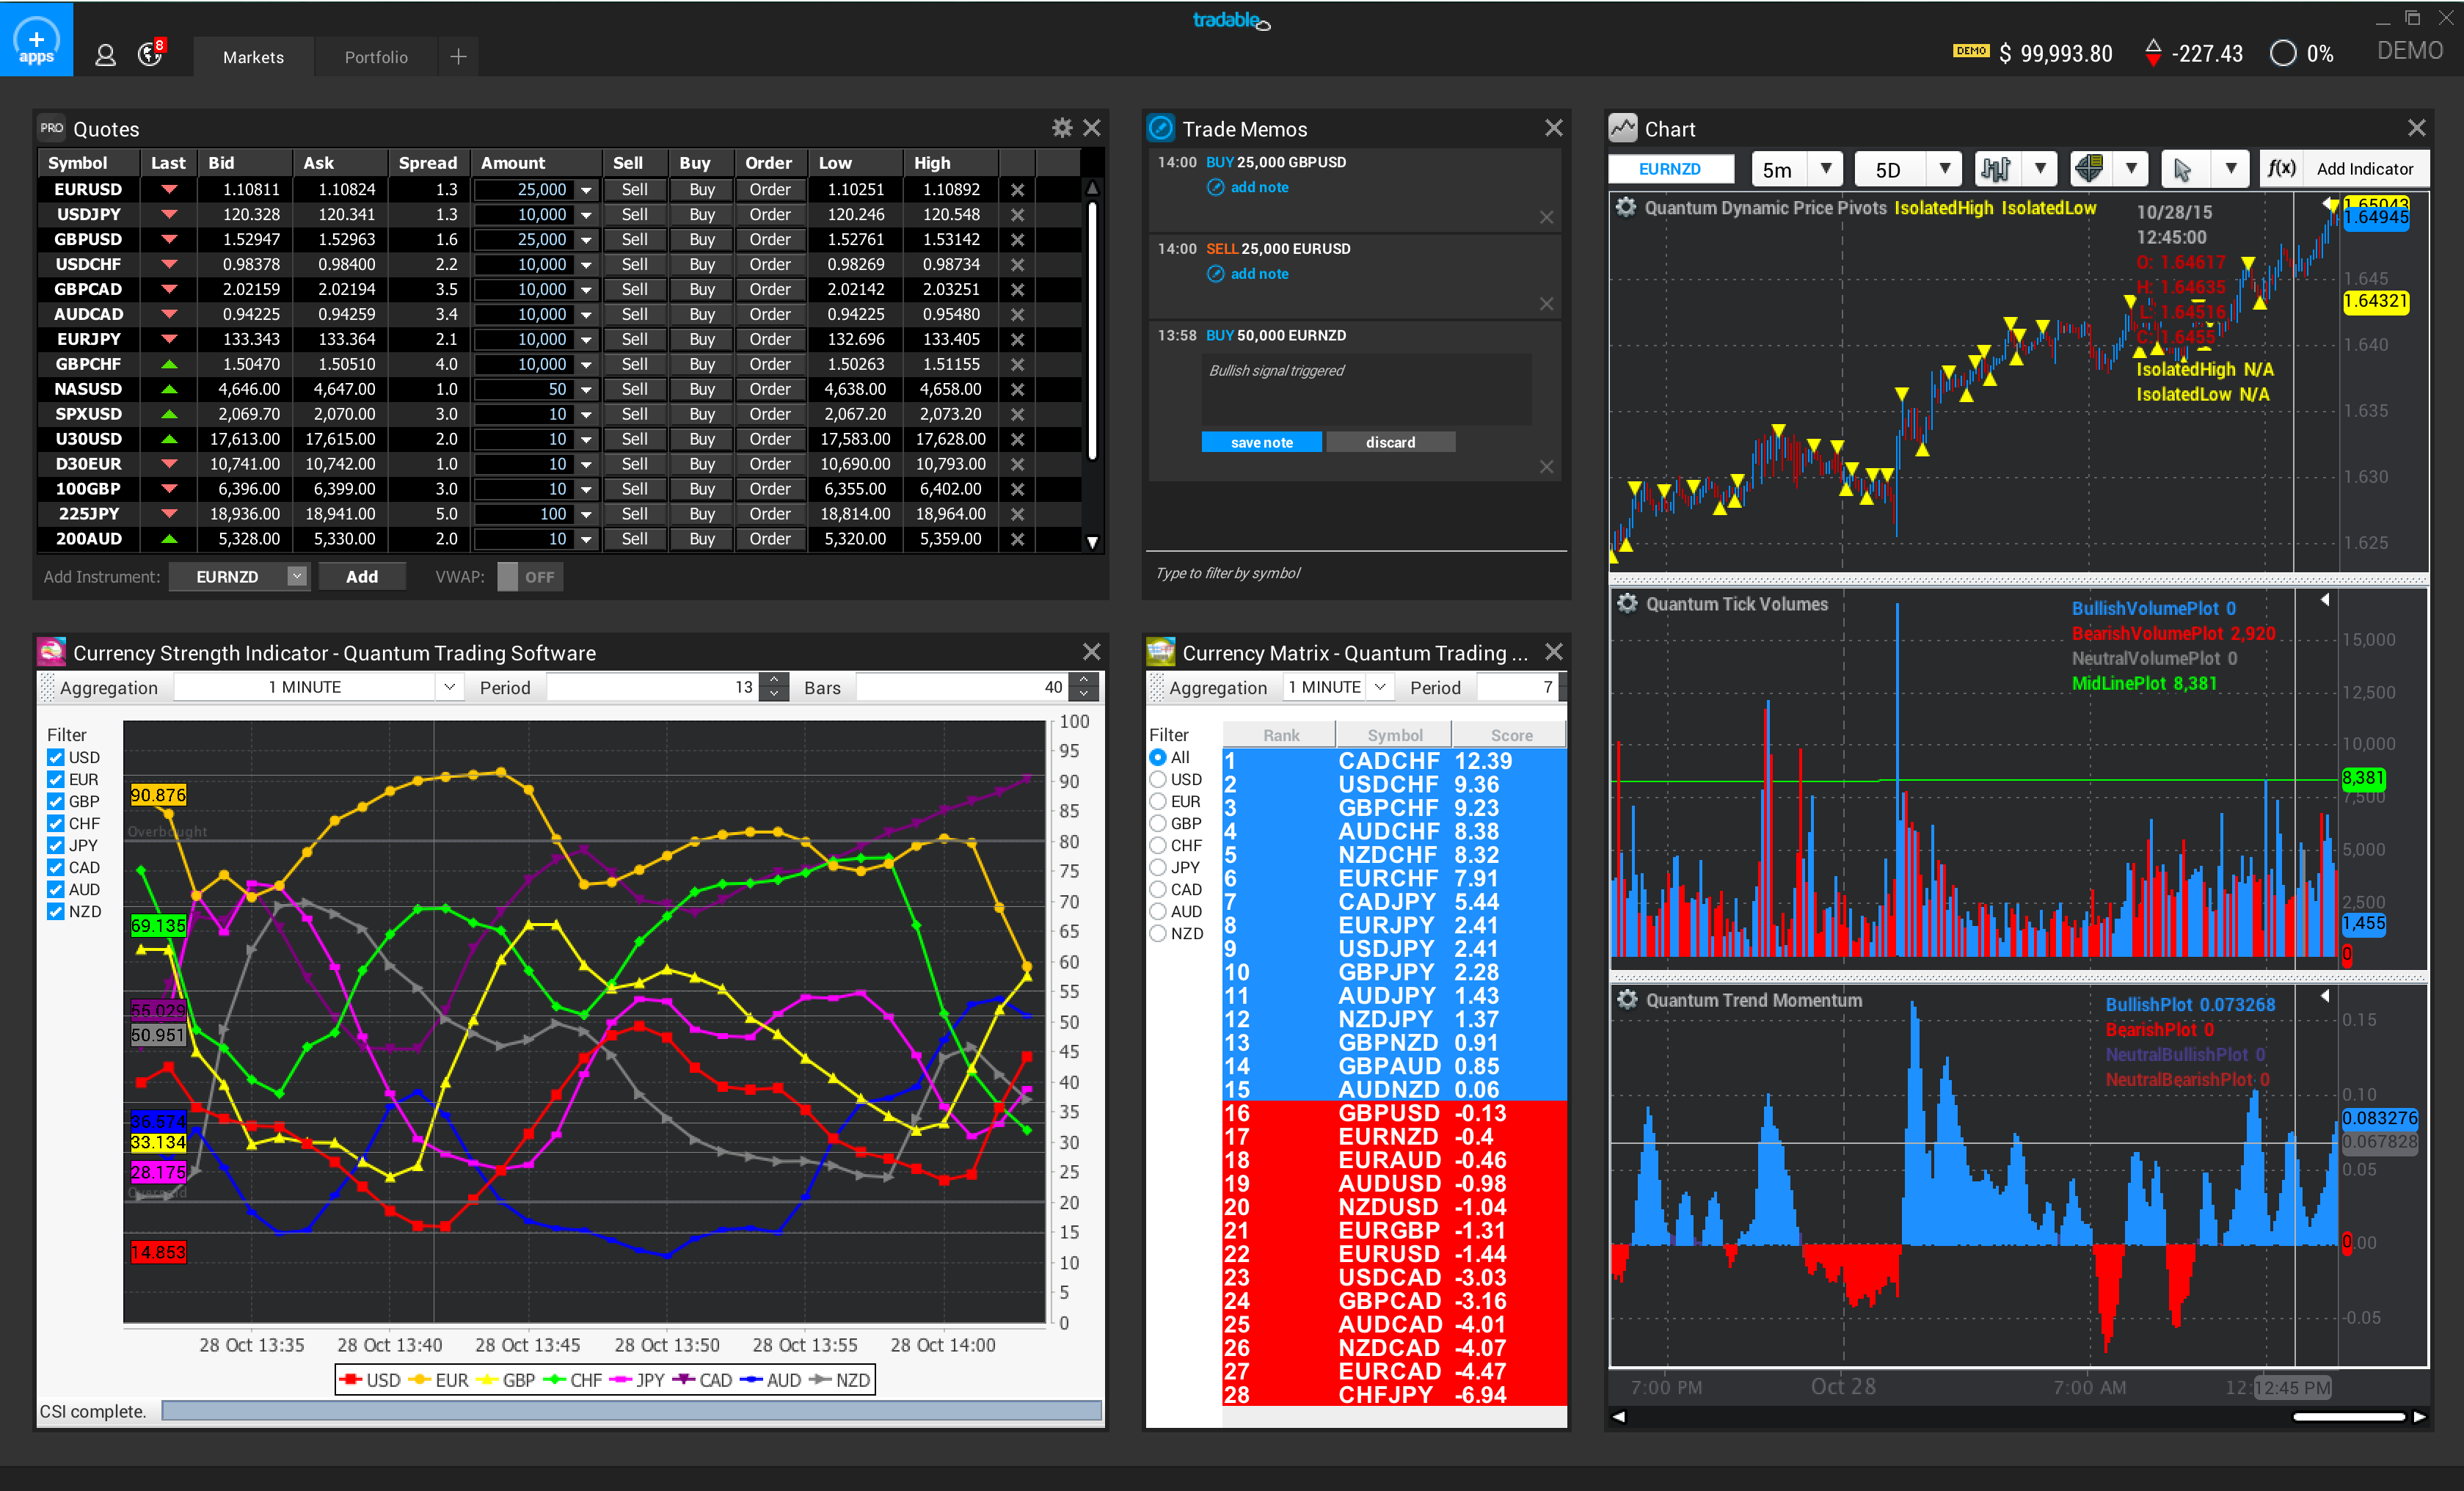 Quantum Trading tools available inside Tradable